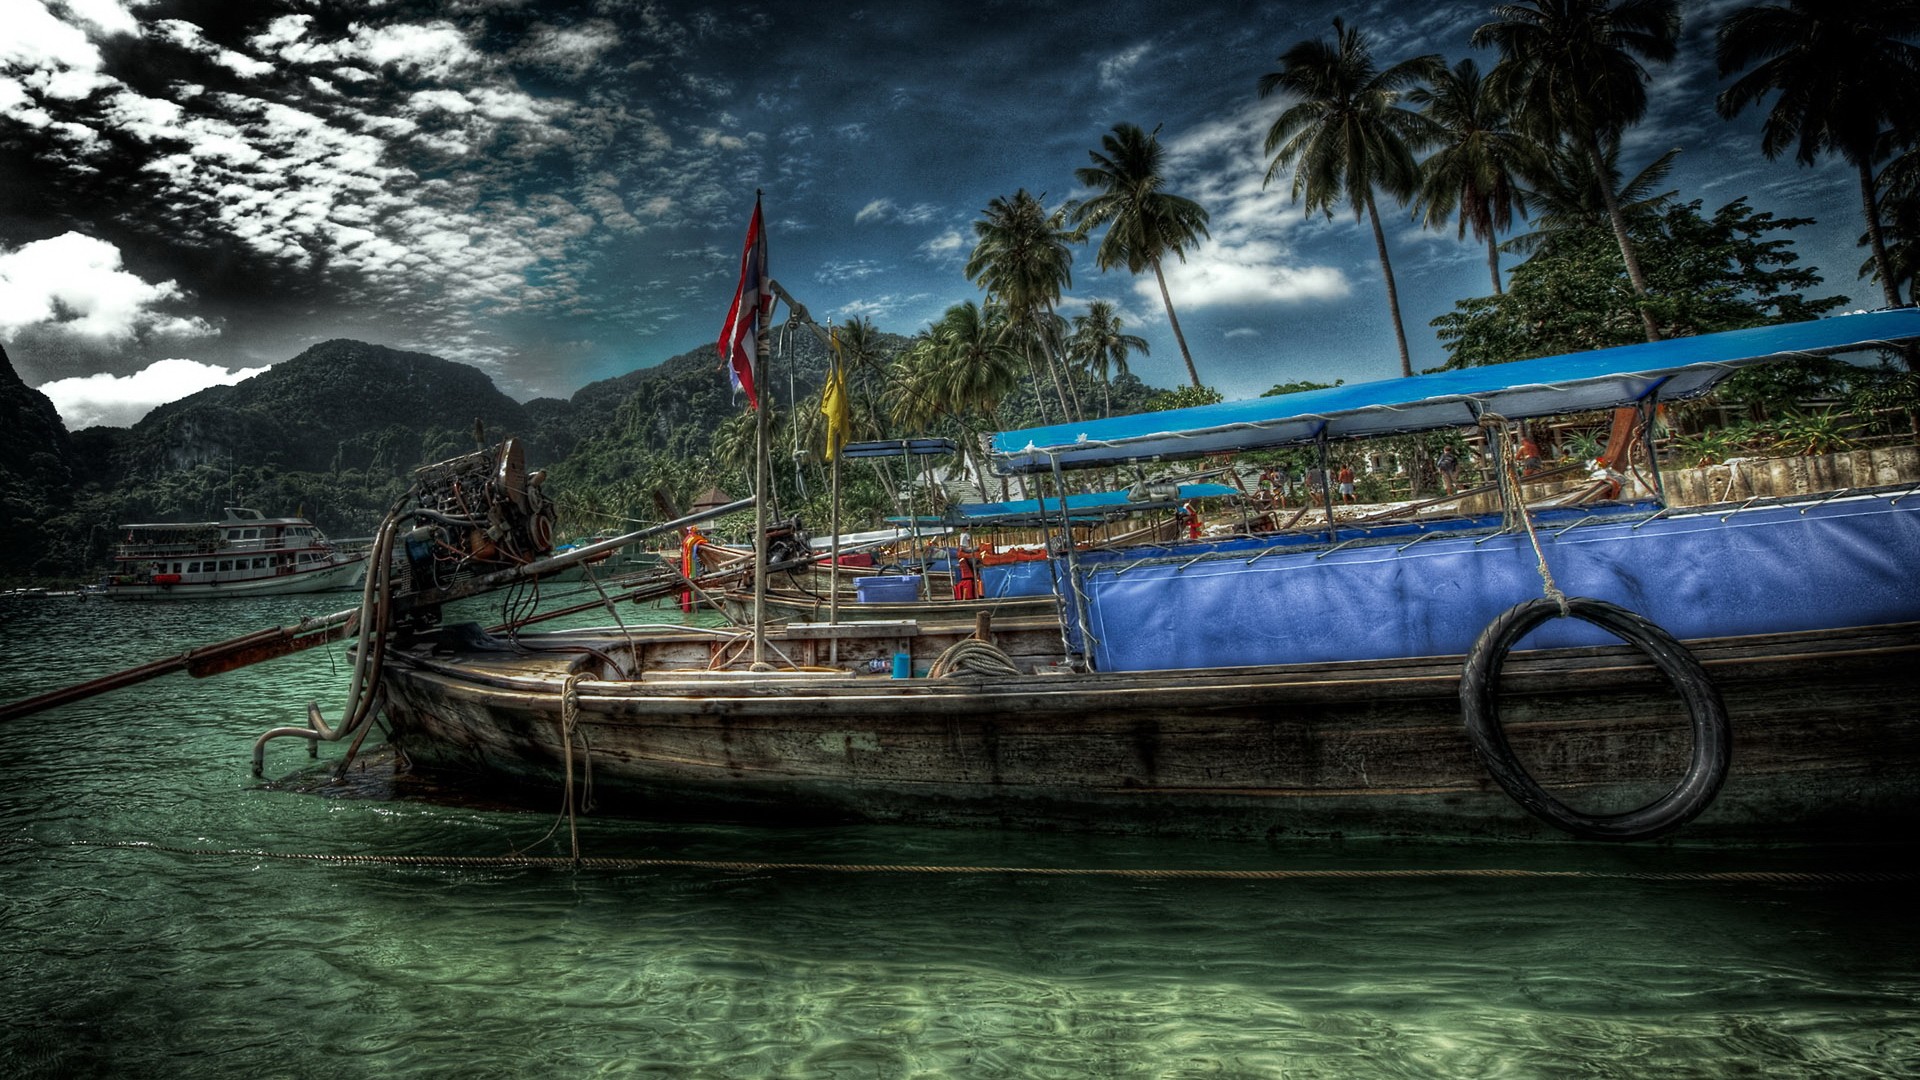 General 1920x1080 HDR boat palm trees island clouds vehicle